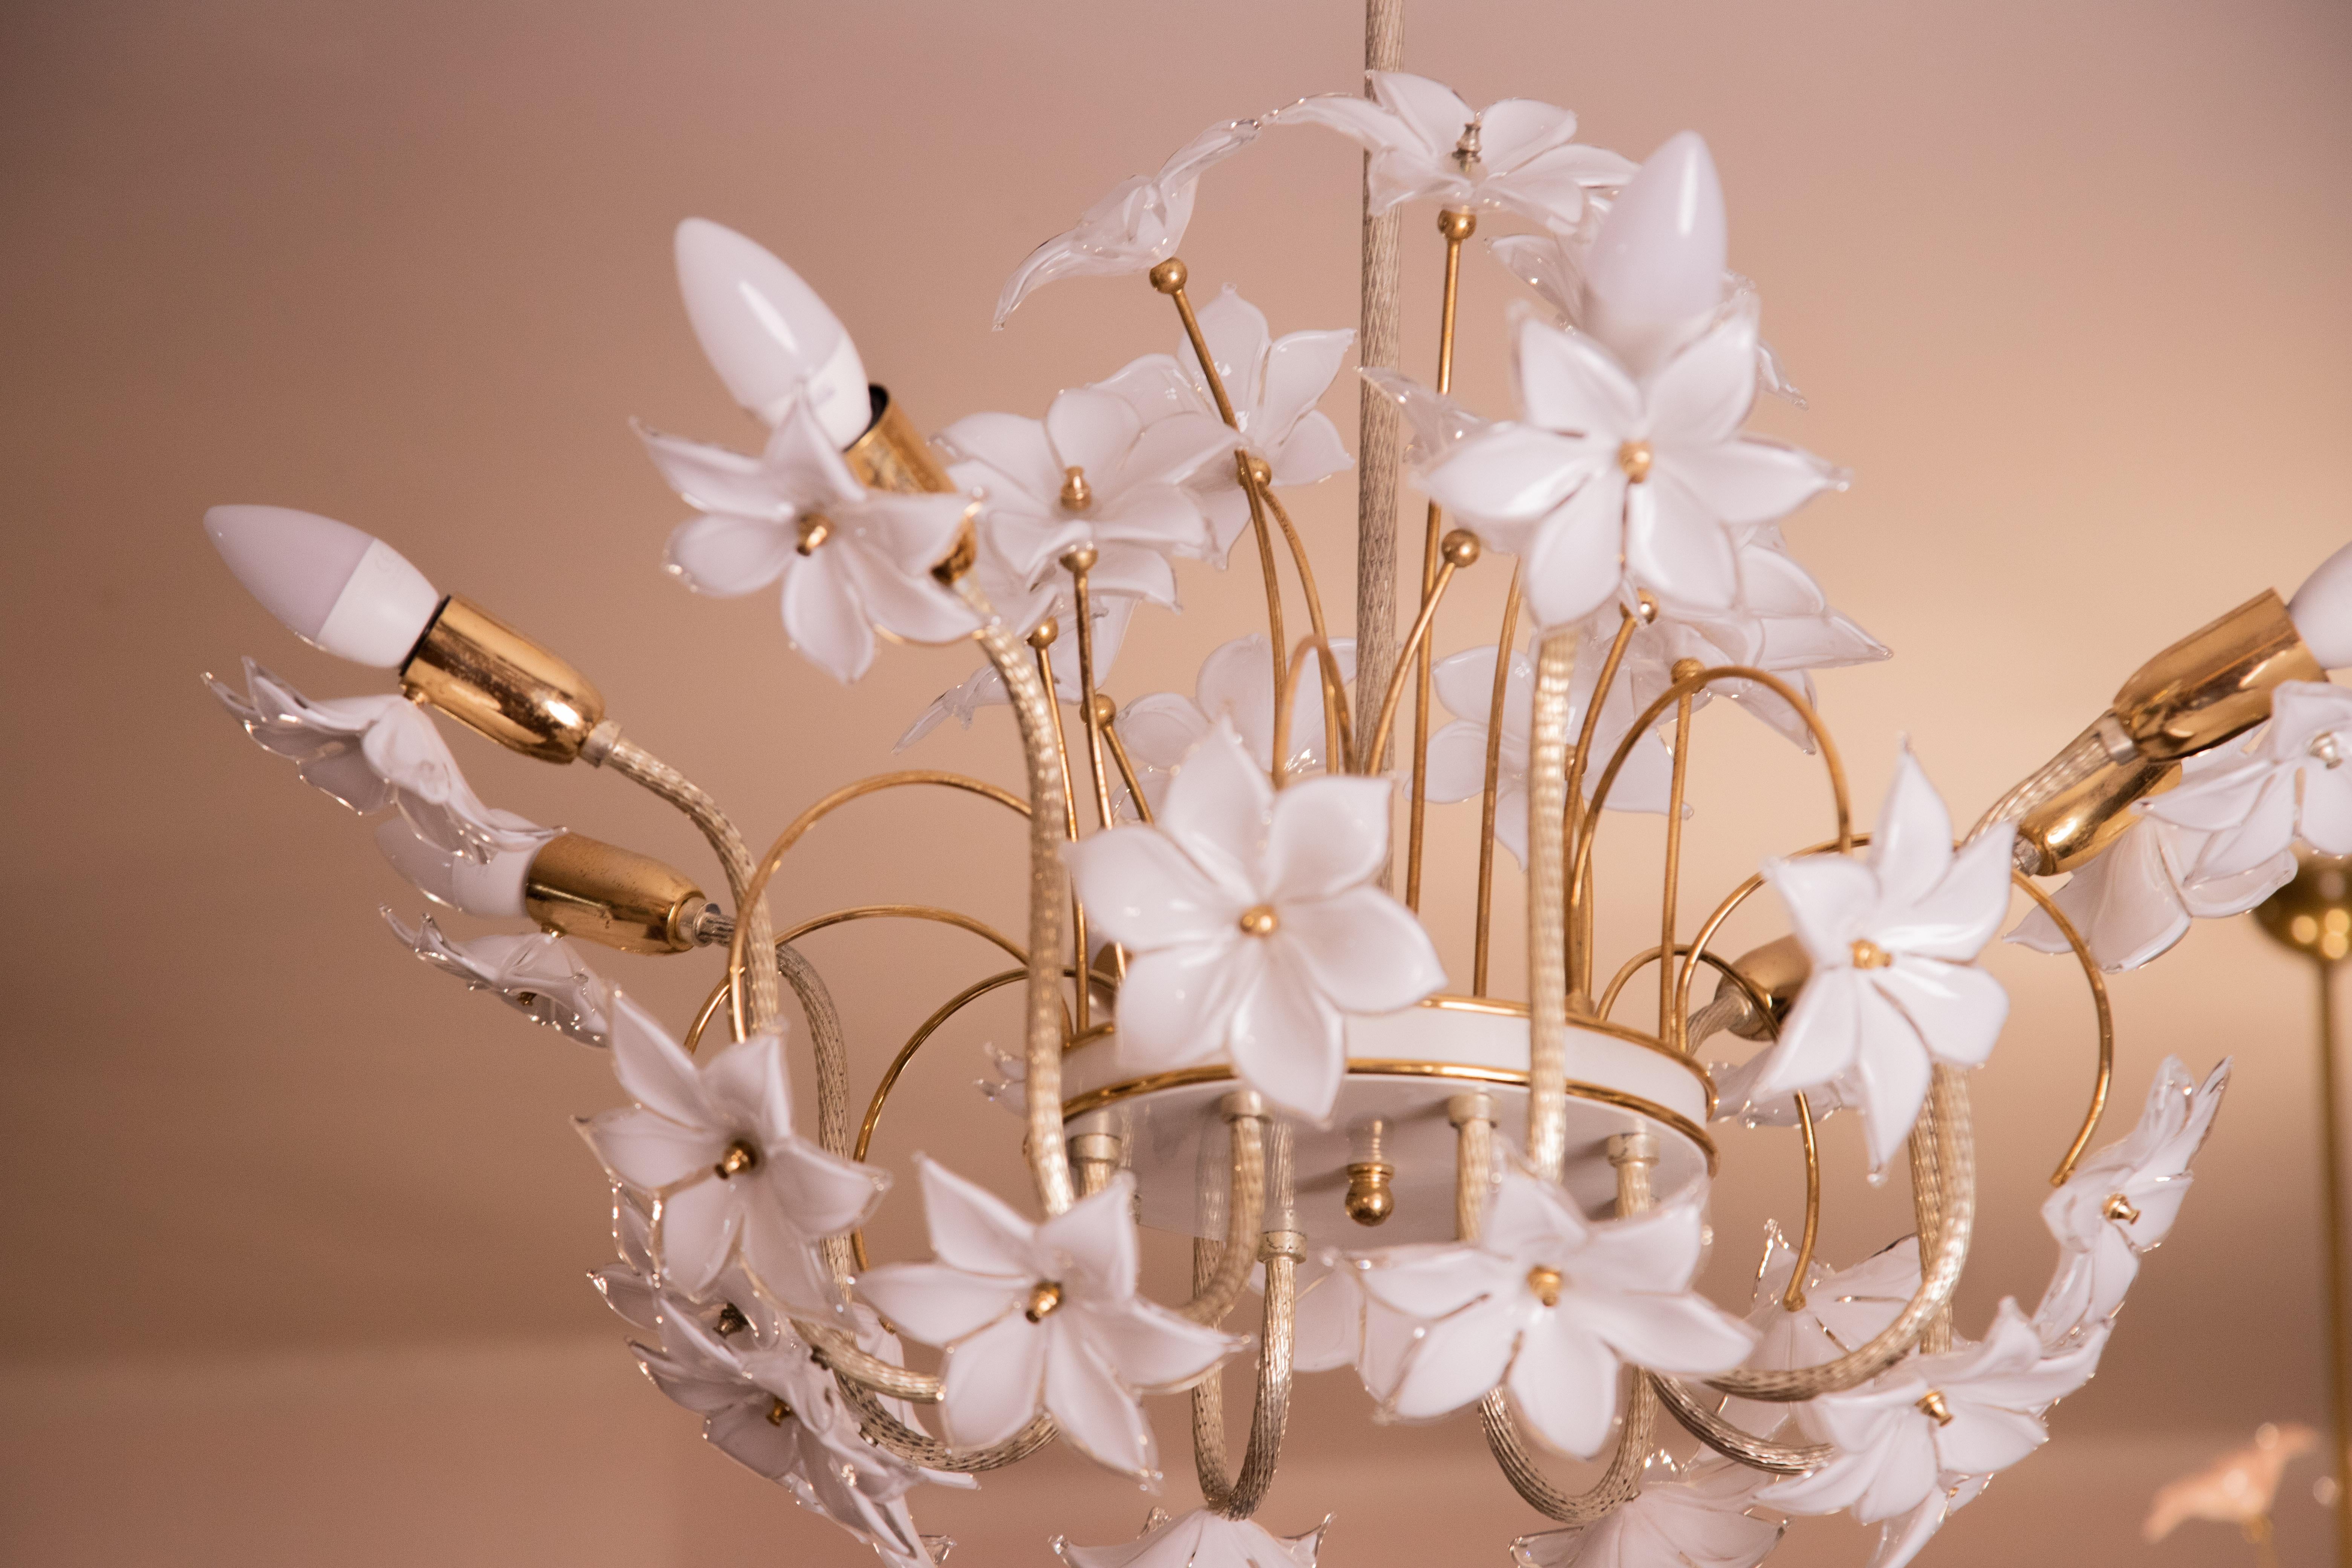 Vintage Murano glass chandelier full of white flowers.
The chandelier has 8 light points with E14 connection.
The structure is in gold bath and some signs of time are visible, giving it a certain beauty.
The height of the chandelier is 90 cm, the